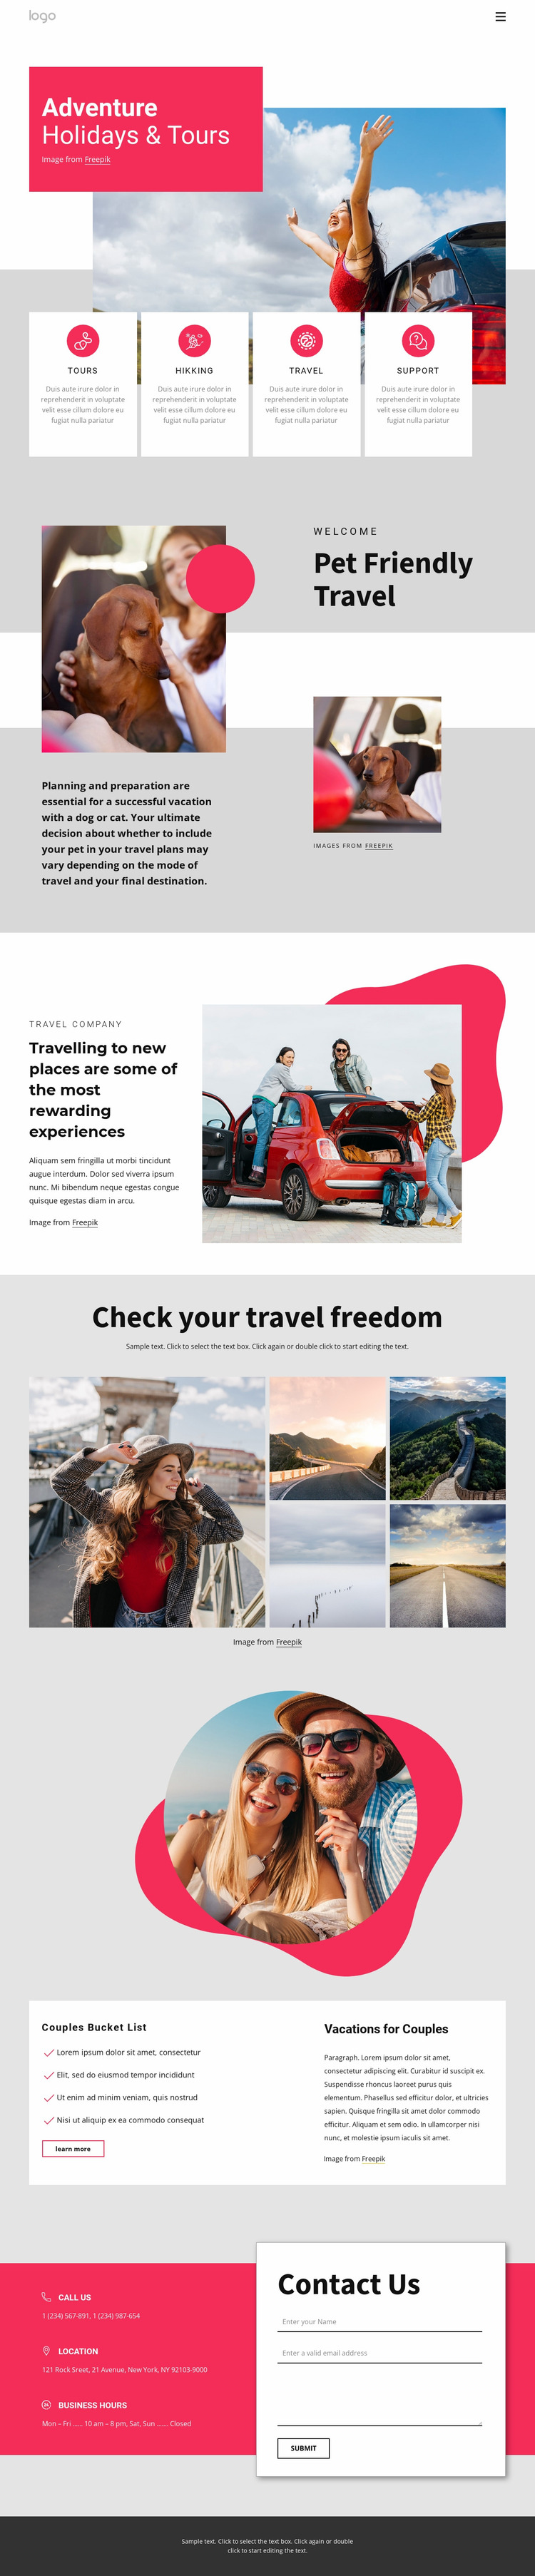 Adventure holidays and tours Website Mockup